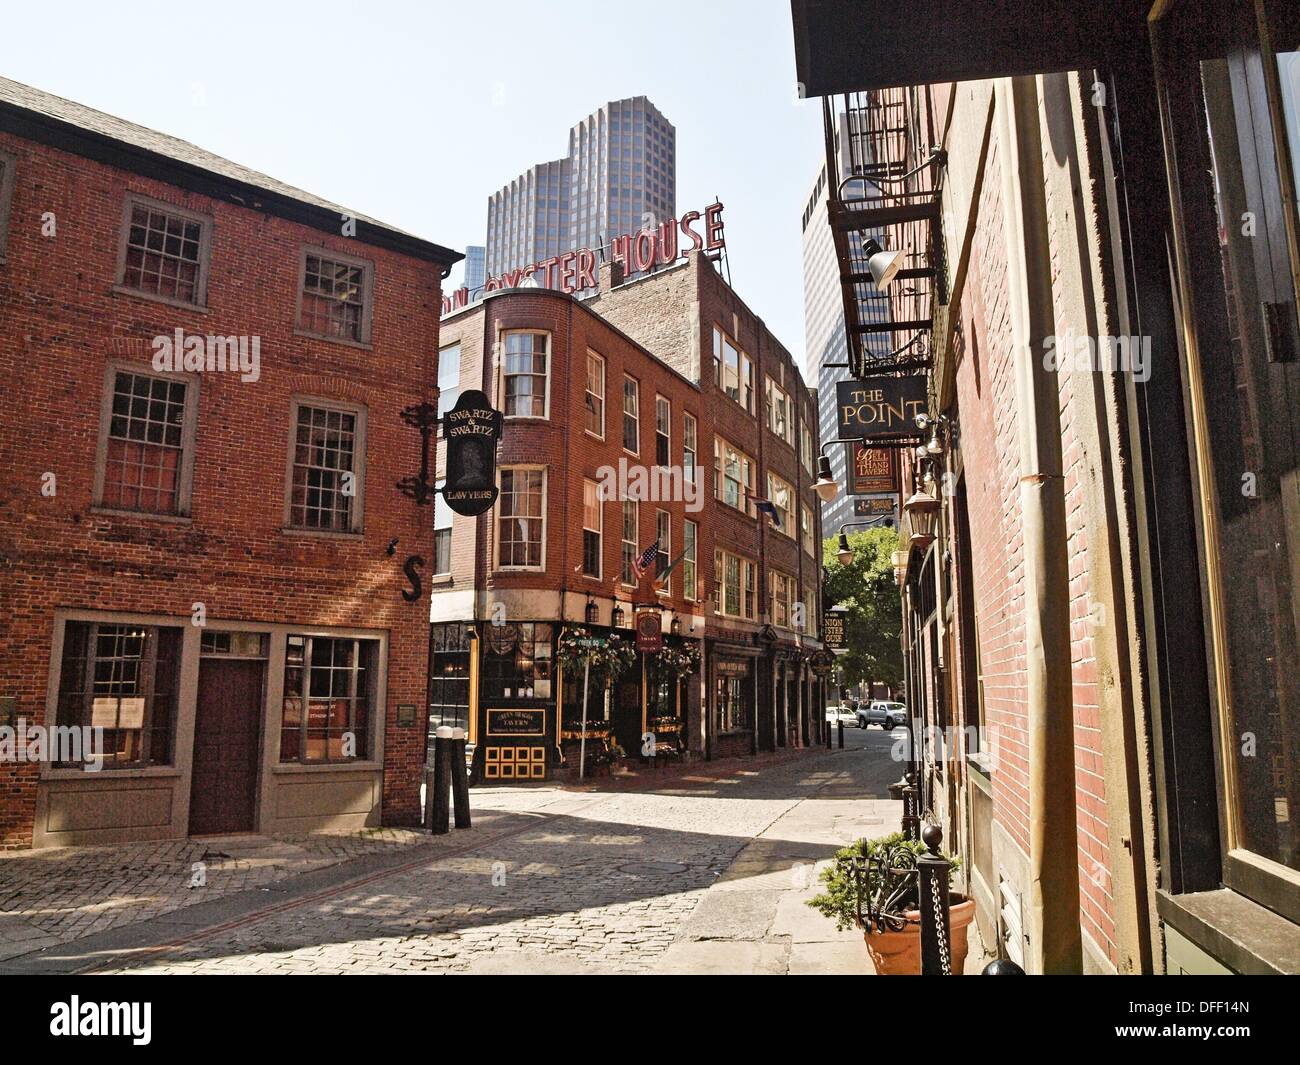 Historic Boston, Massachusetts  This is the oldest neighborhood in Boston and is preserved as it was in the 18th Contury  A Stock Photo